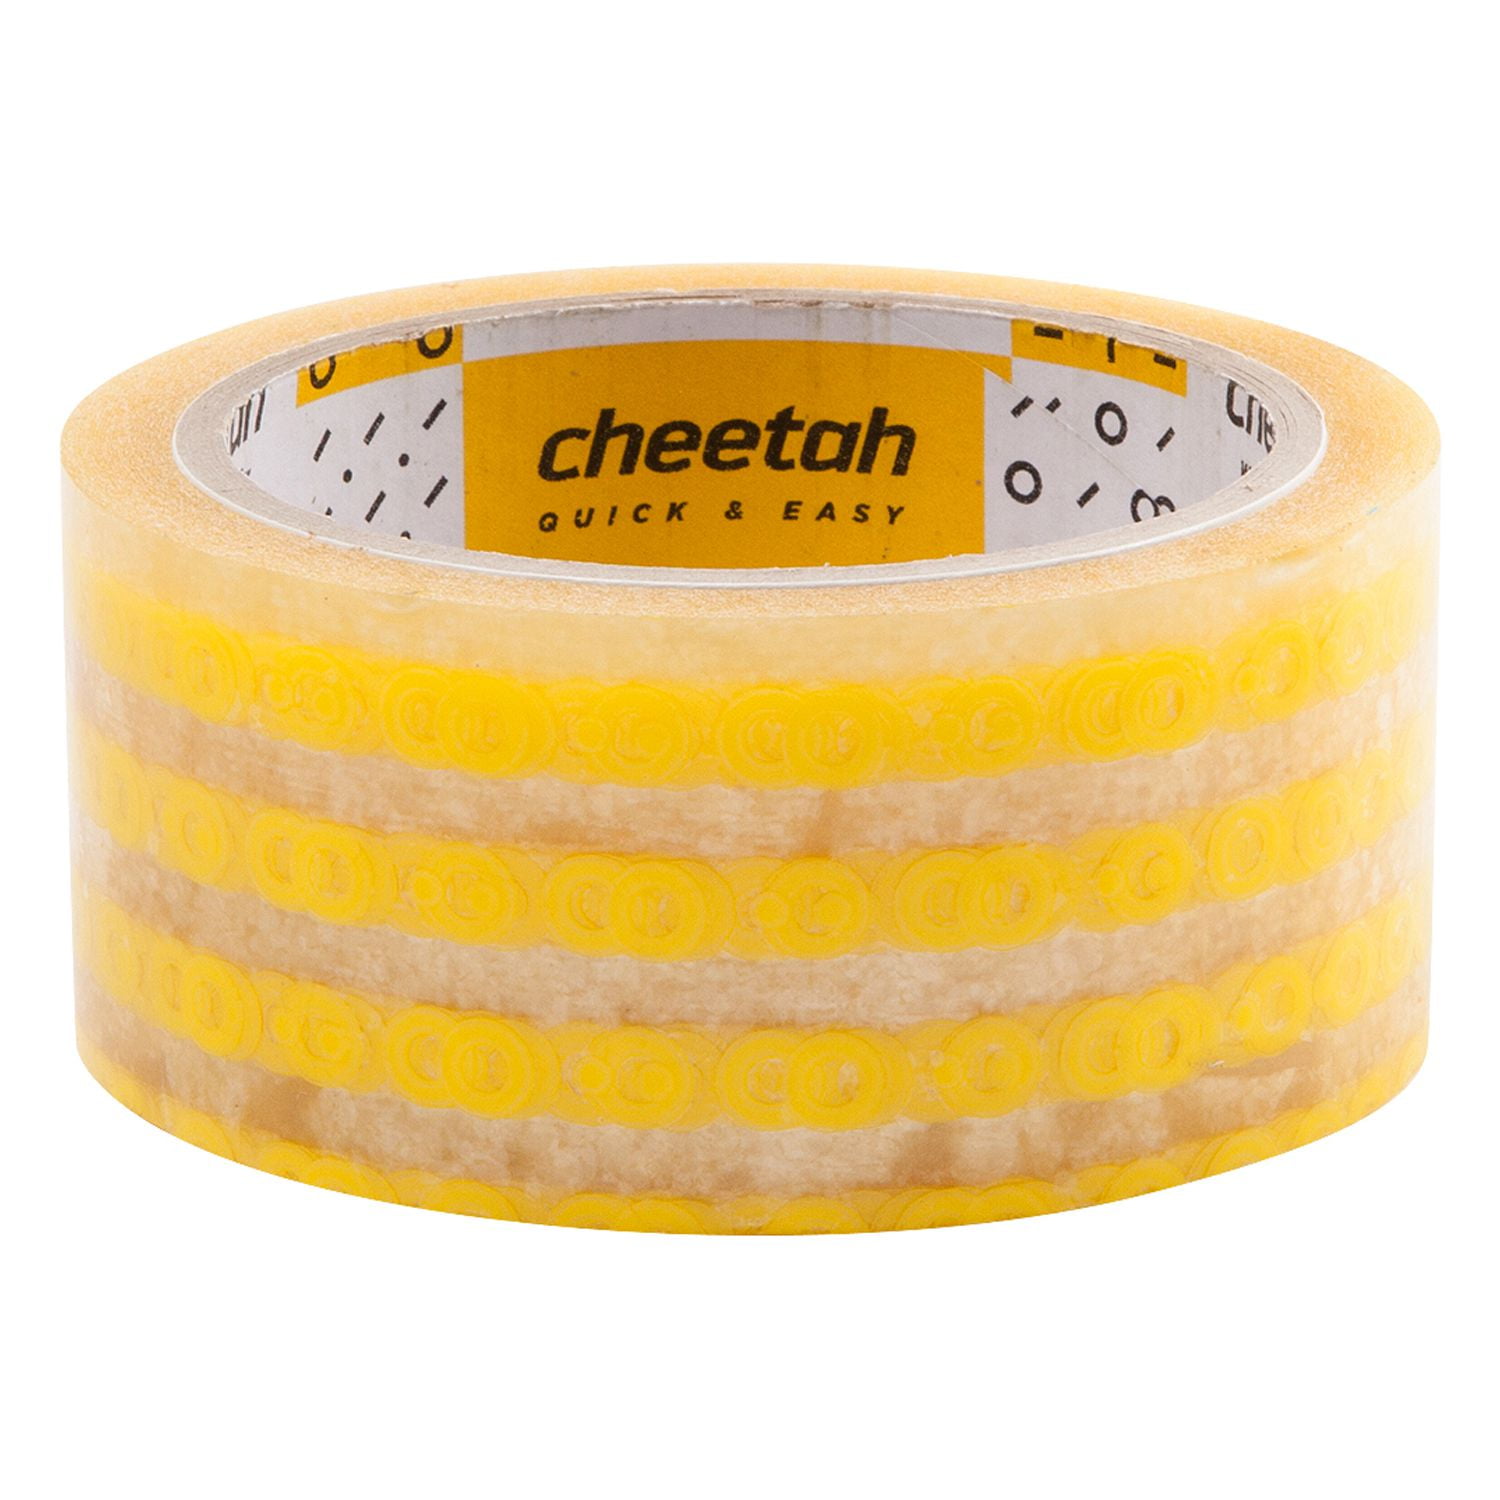 Cheetah Fts Hand Cut Tape, Hand Tearable Packing Tape 1.77